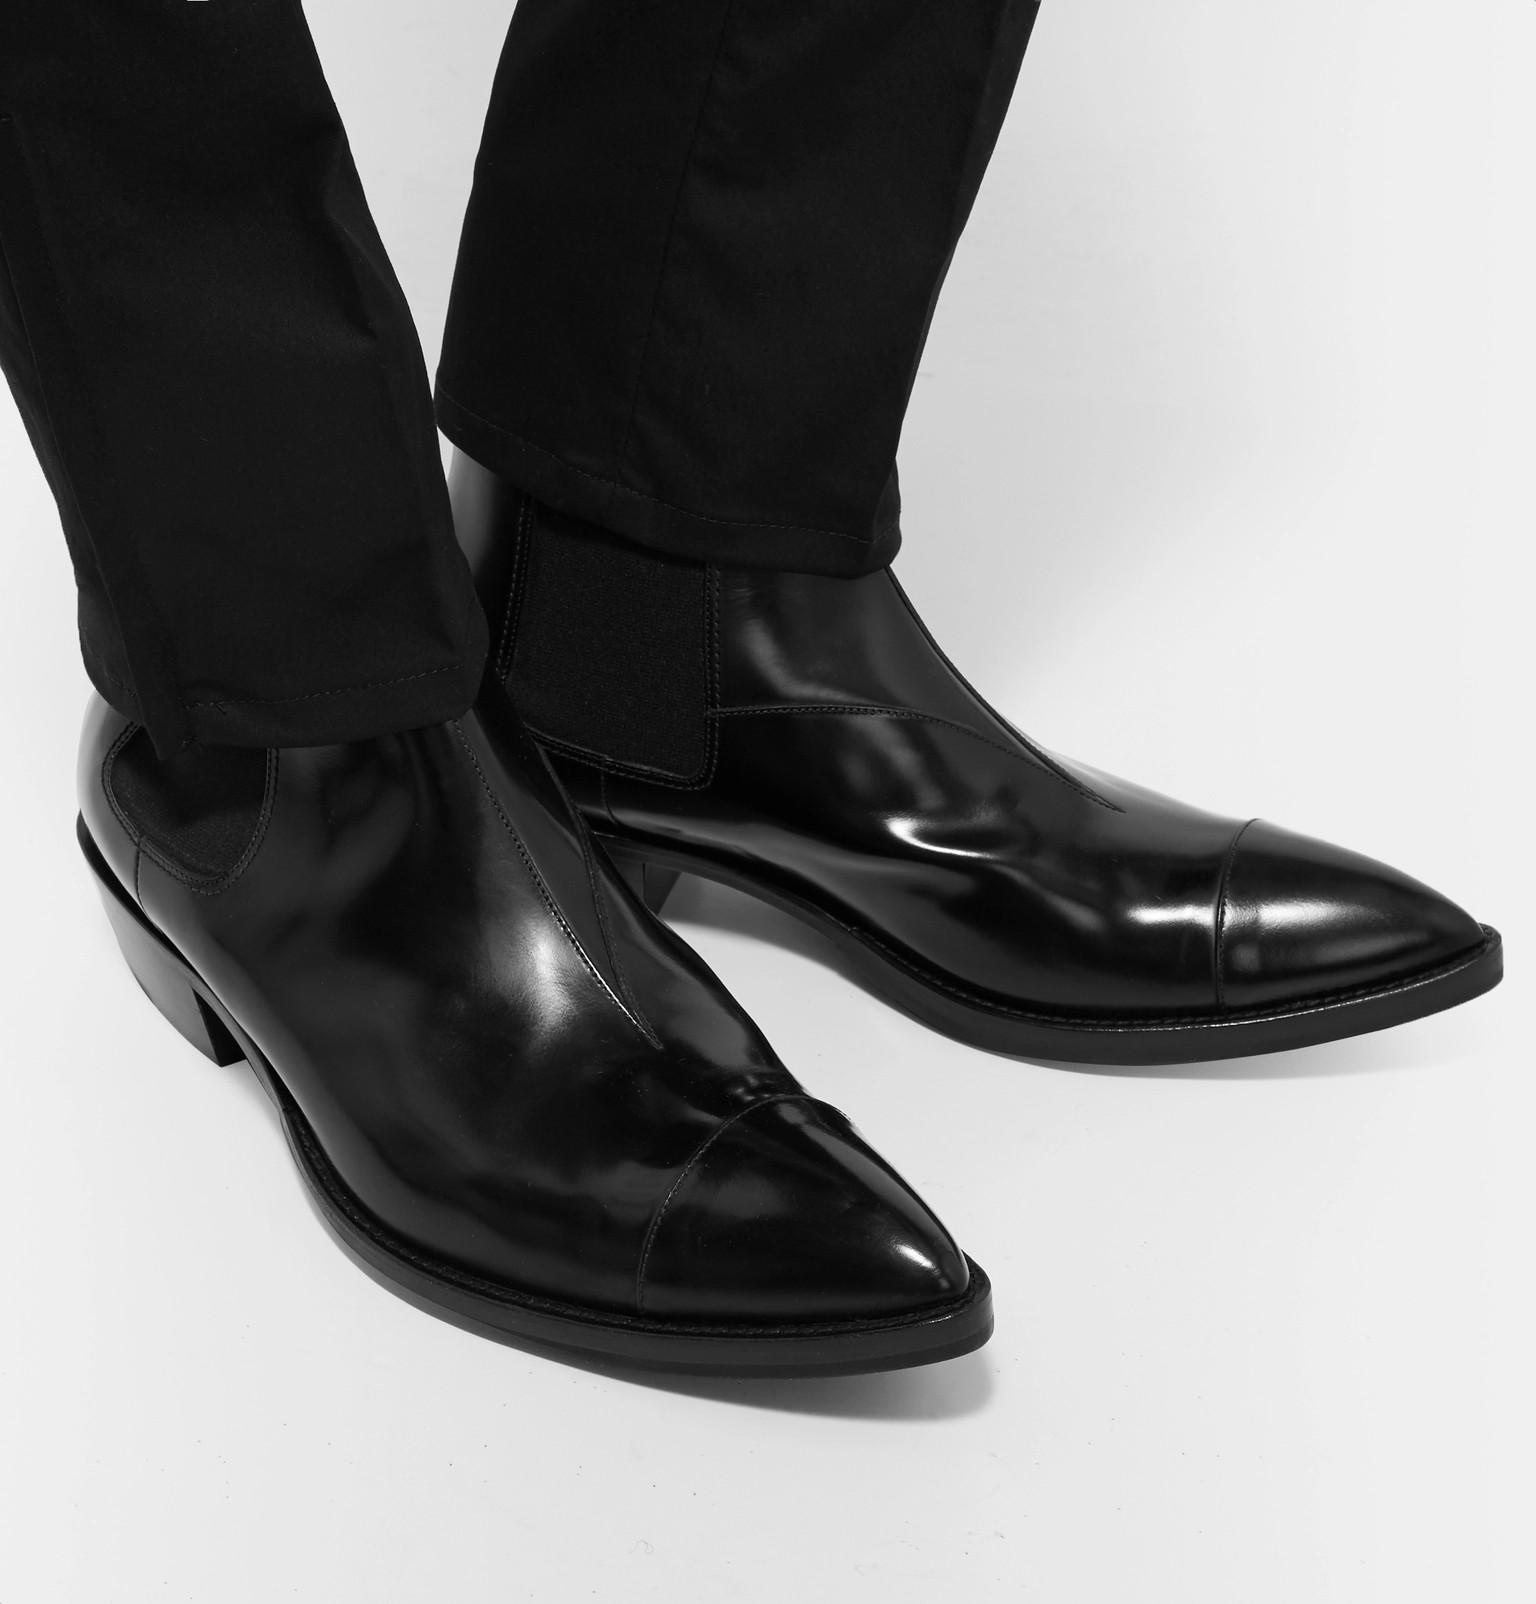 Berluti Heith Austin Glossed-leather Chelsea Boots in Black for Men - Lyst